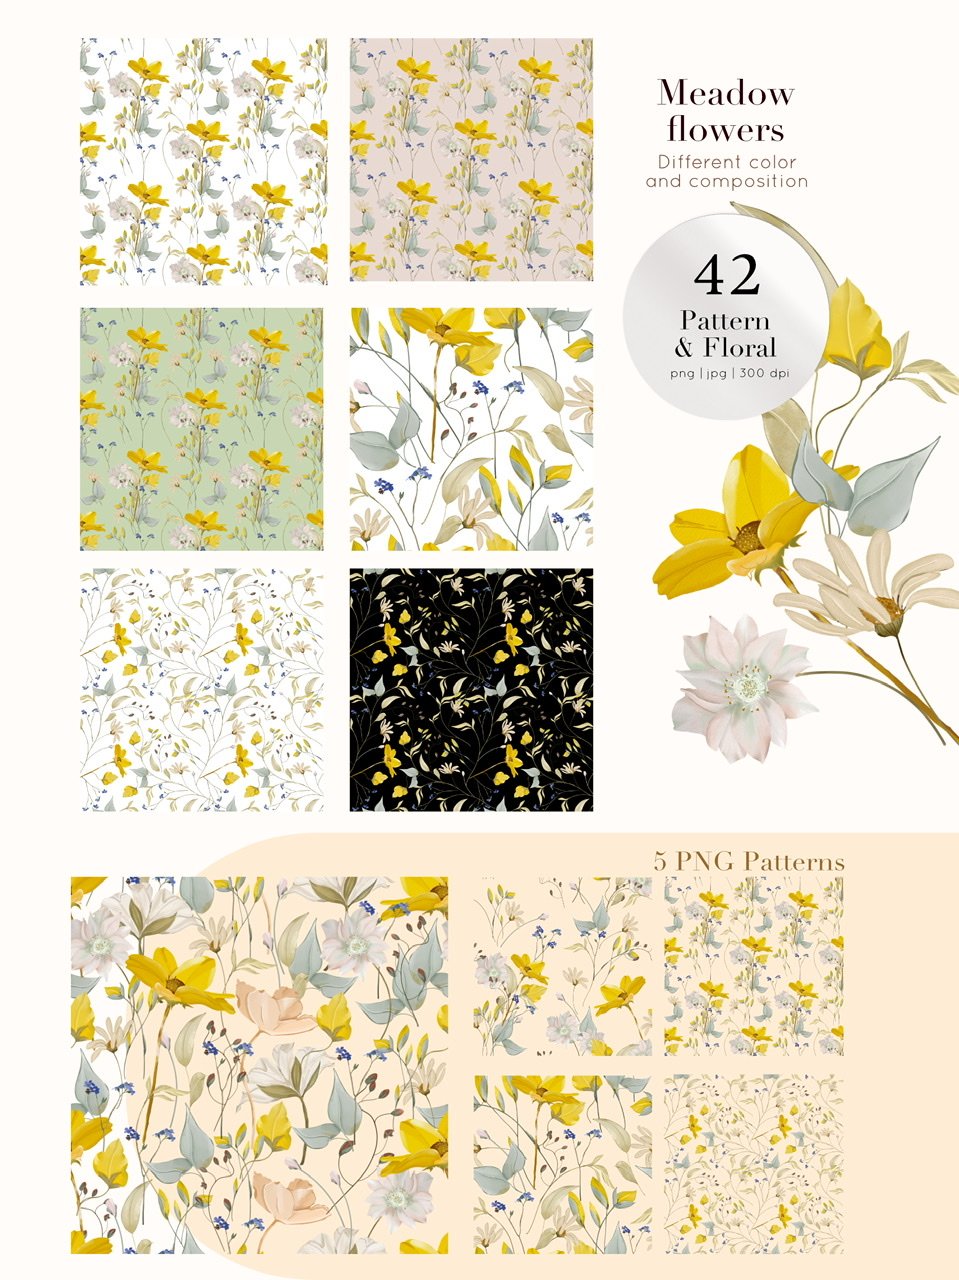 6 meadow flowers patterns and 5 PNG patterns.